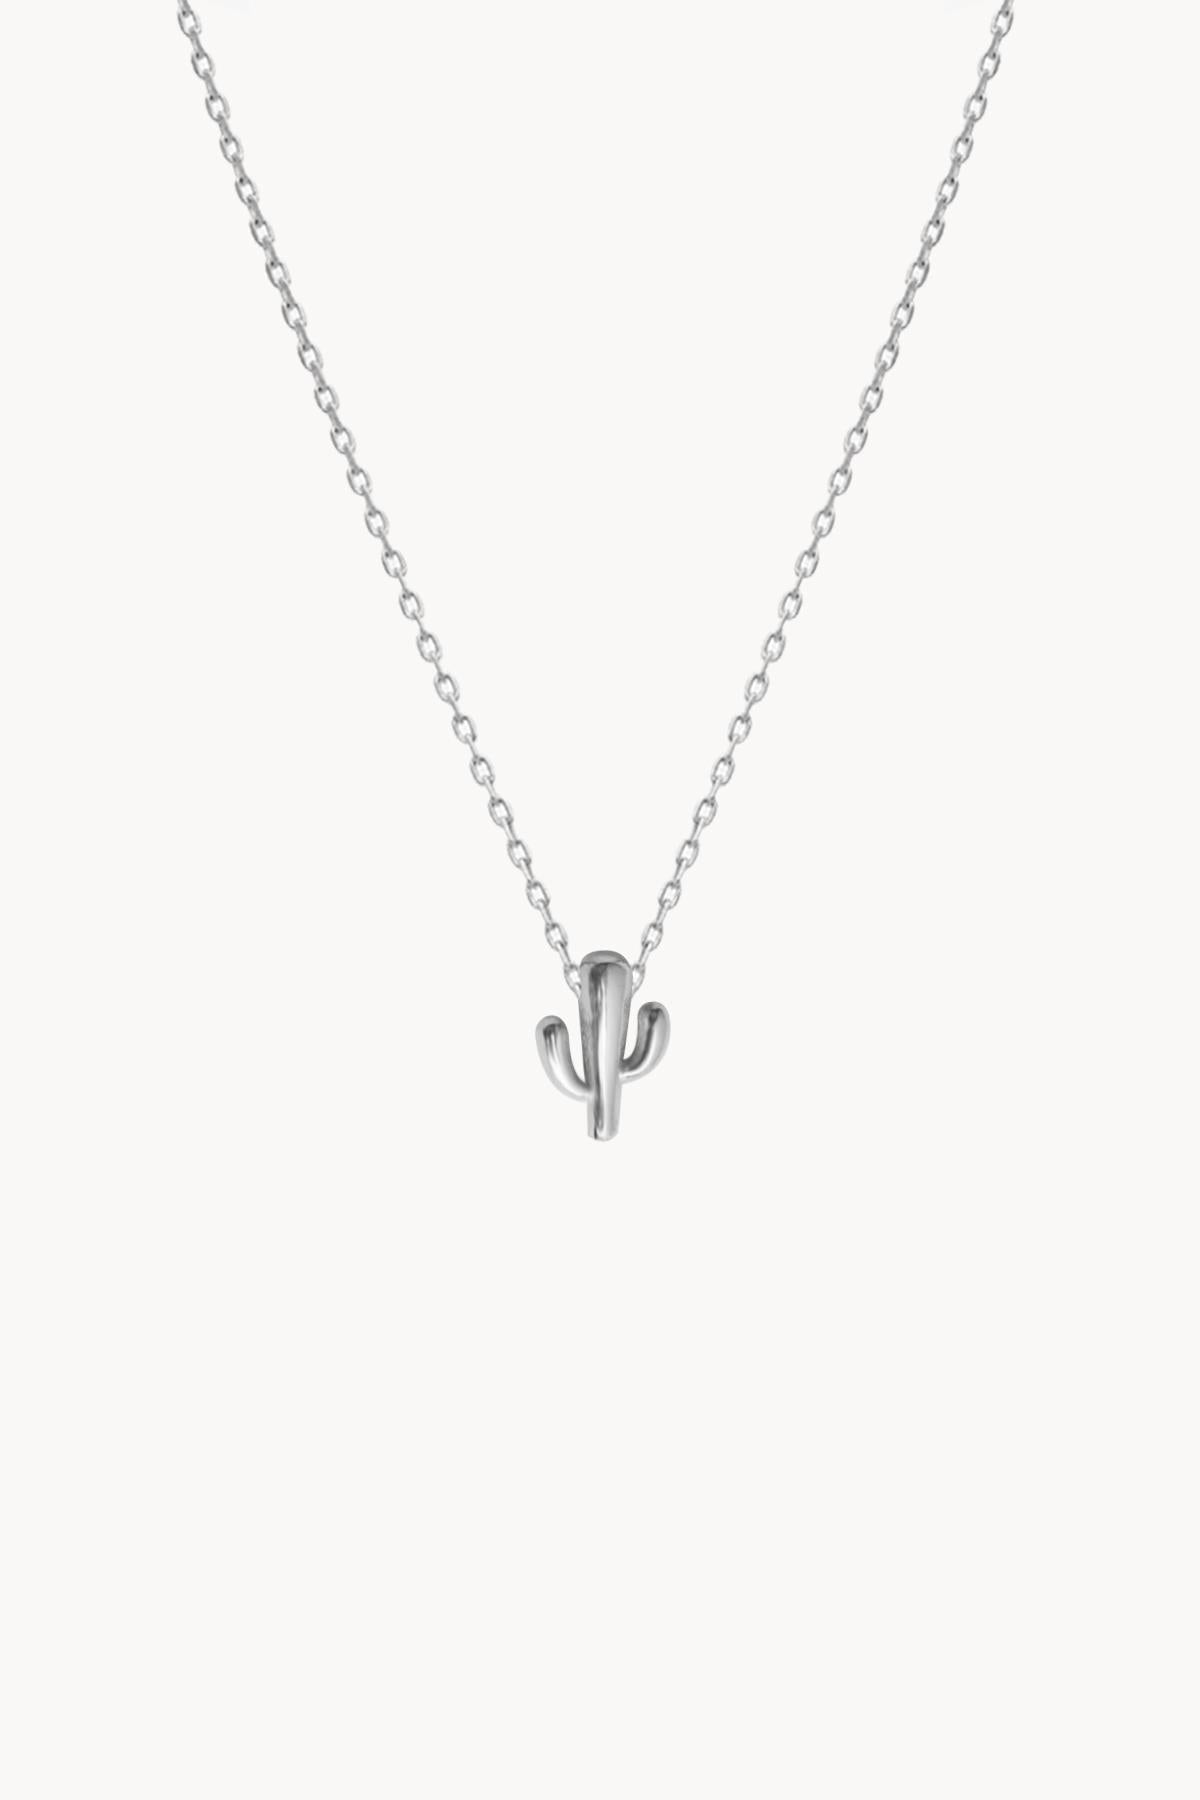 Cactus 925 Sterling Silver Necklace